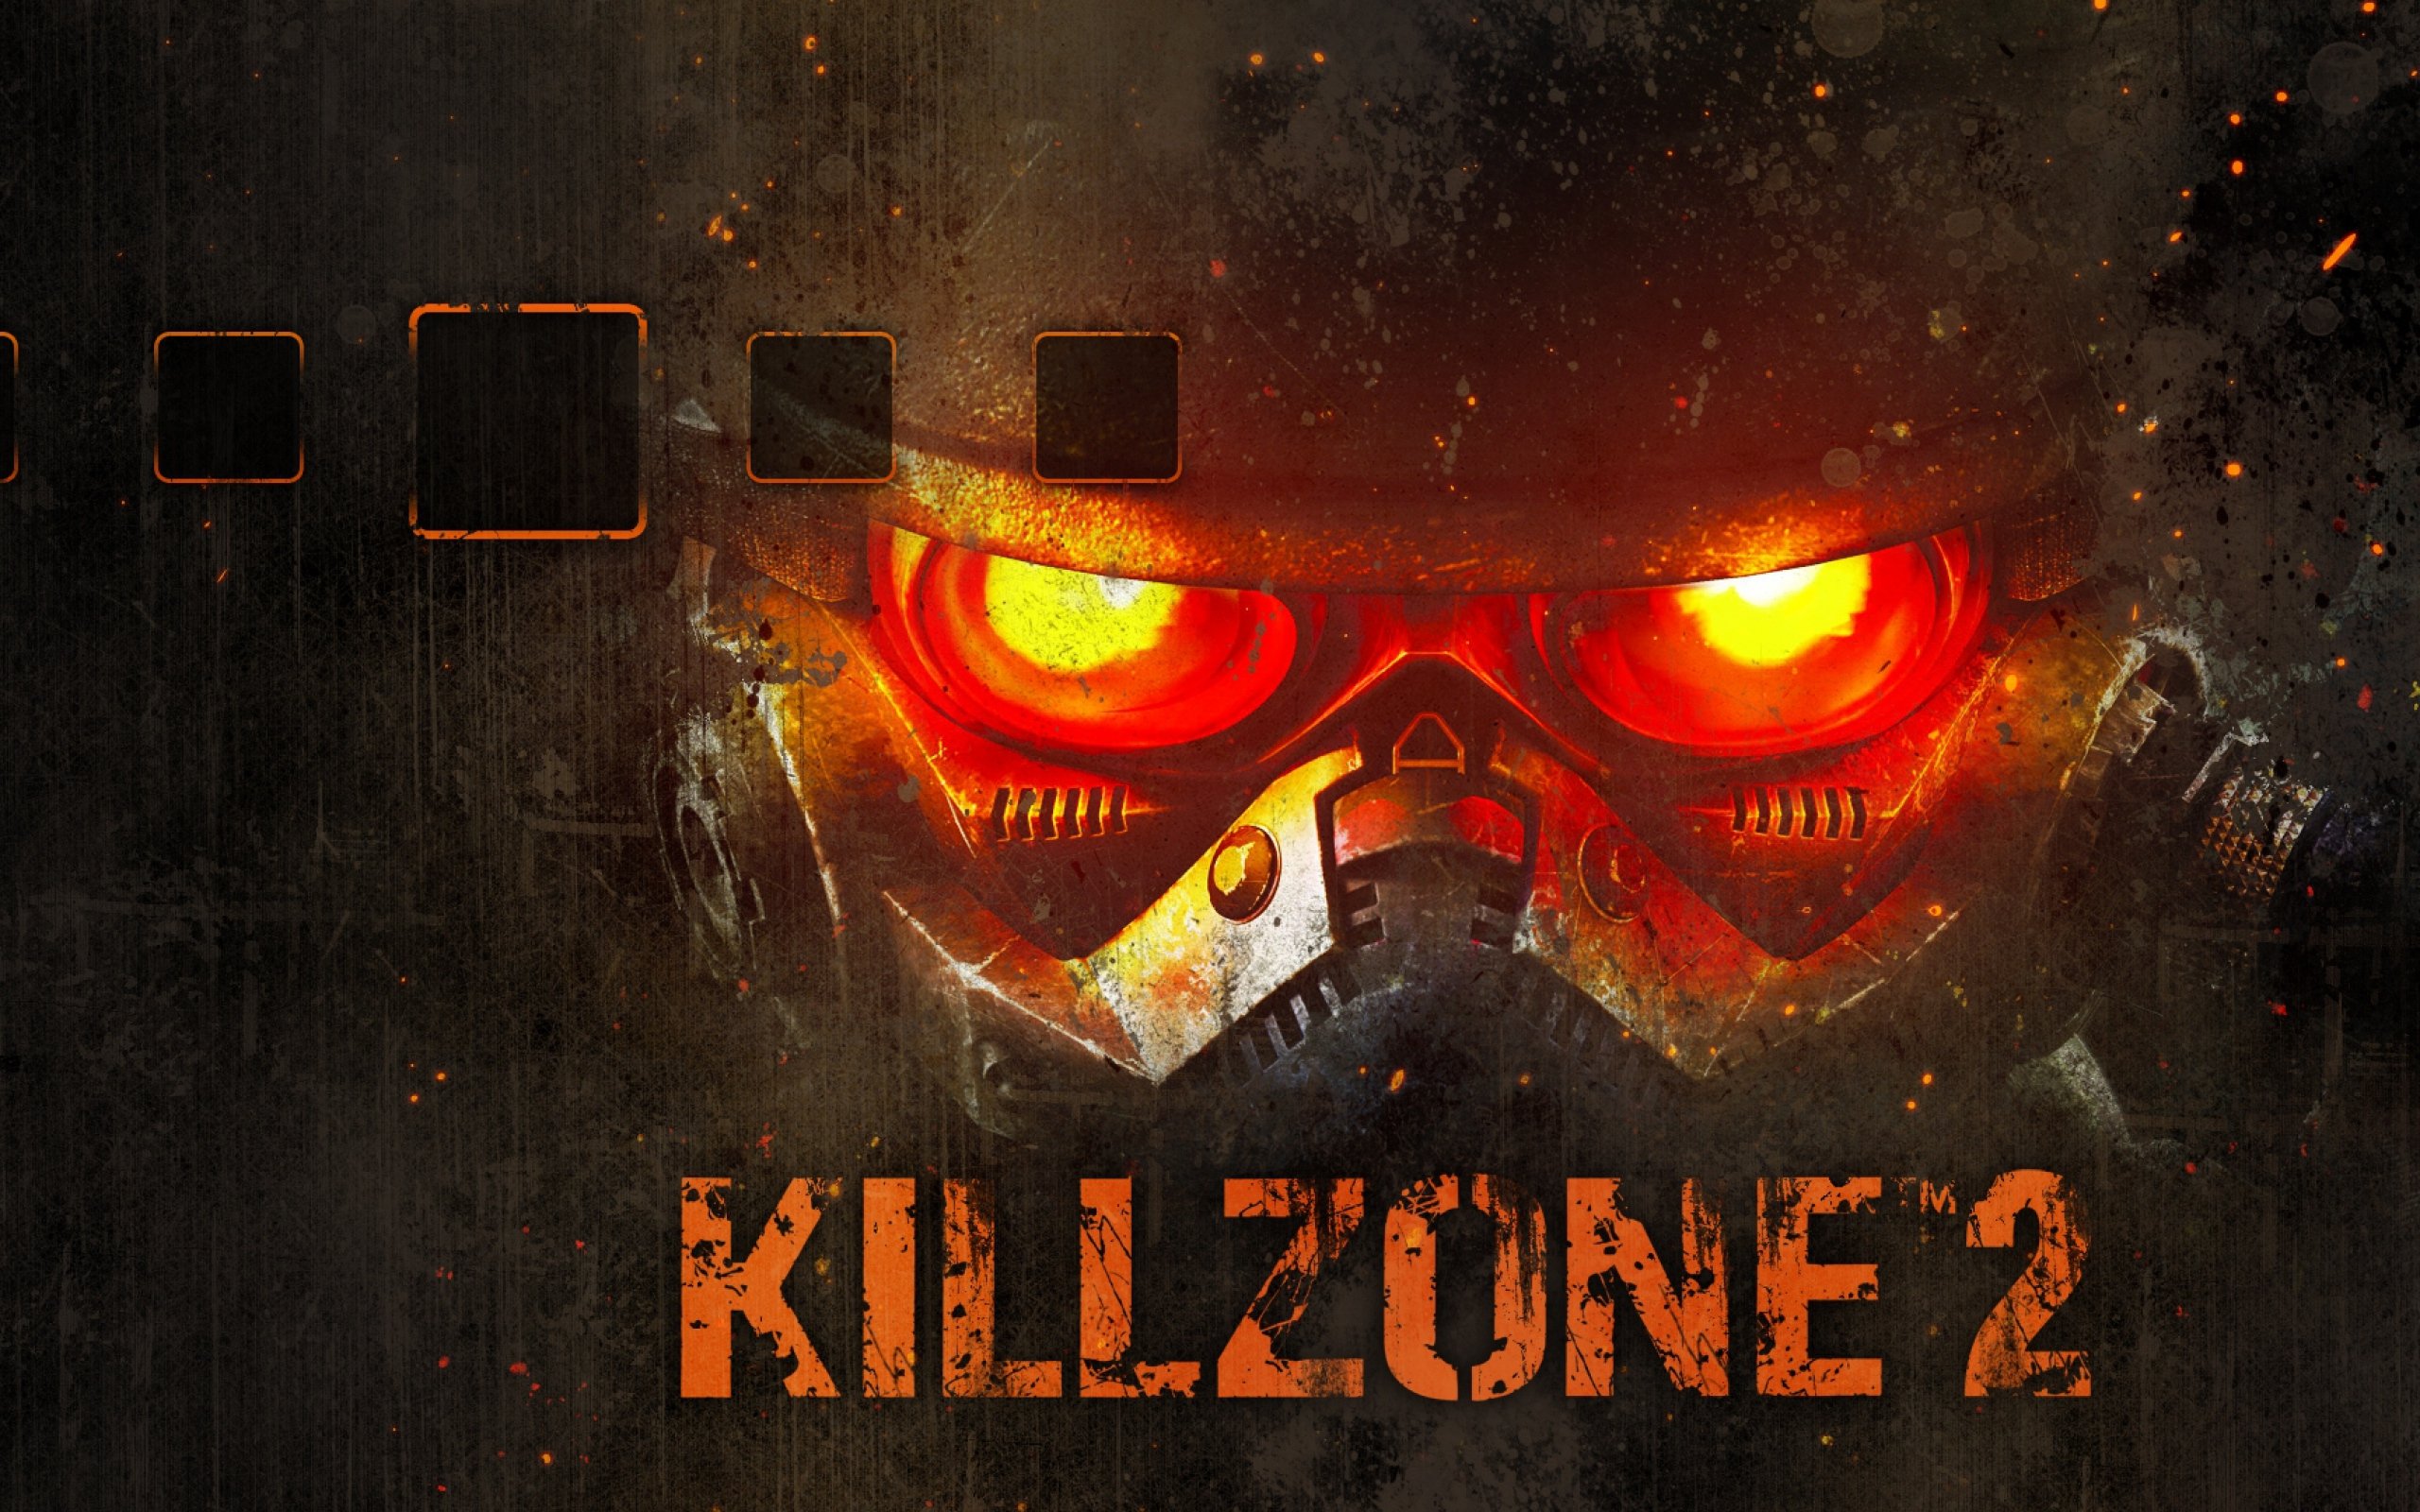 killzone, Stealth, Tactical, Warrior, Sci fi, Futuristic, Shooter, Action, Fighting, Poster Wallpaper